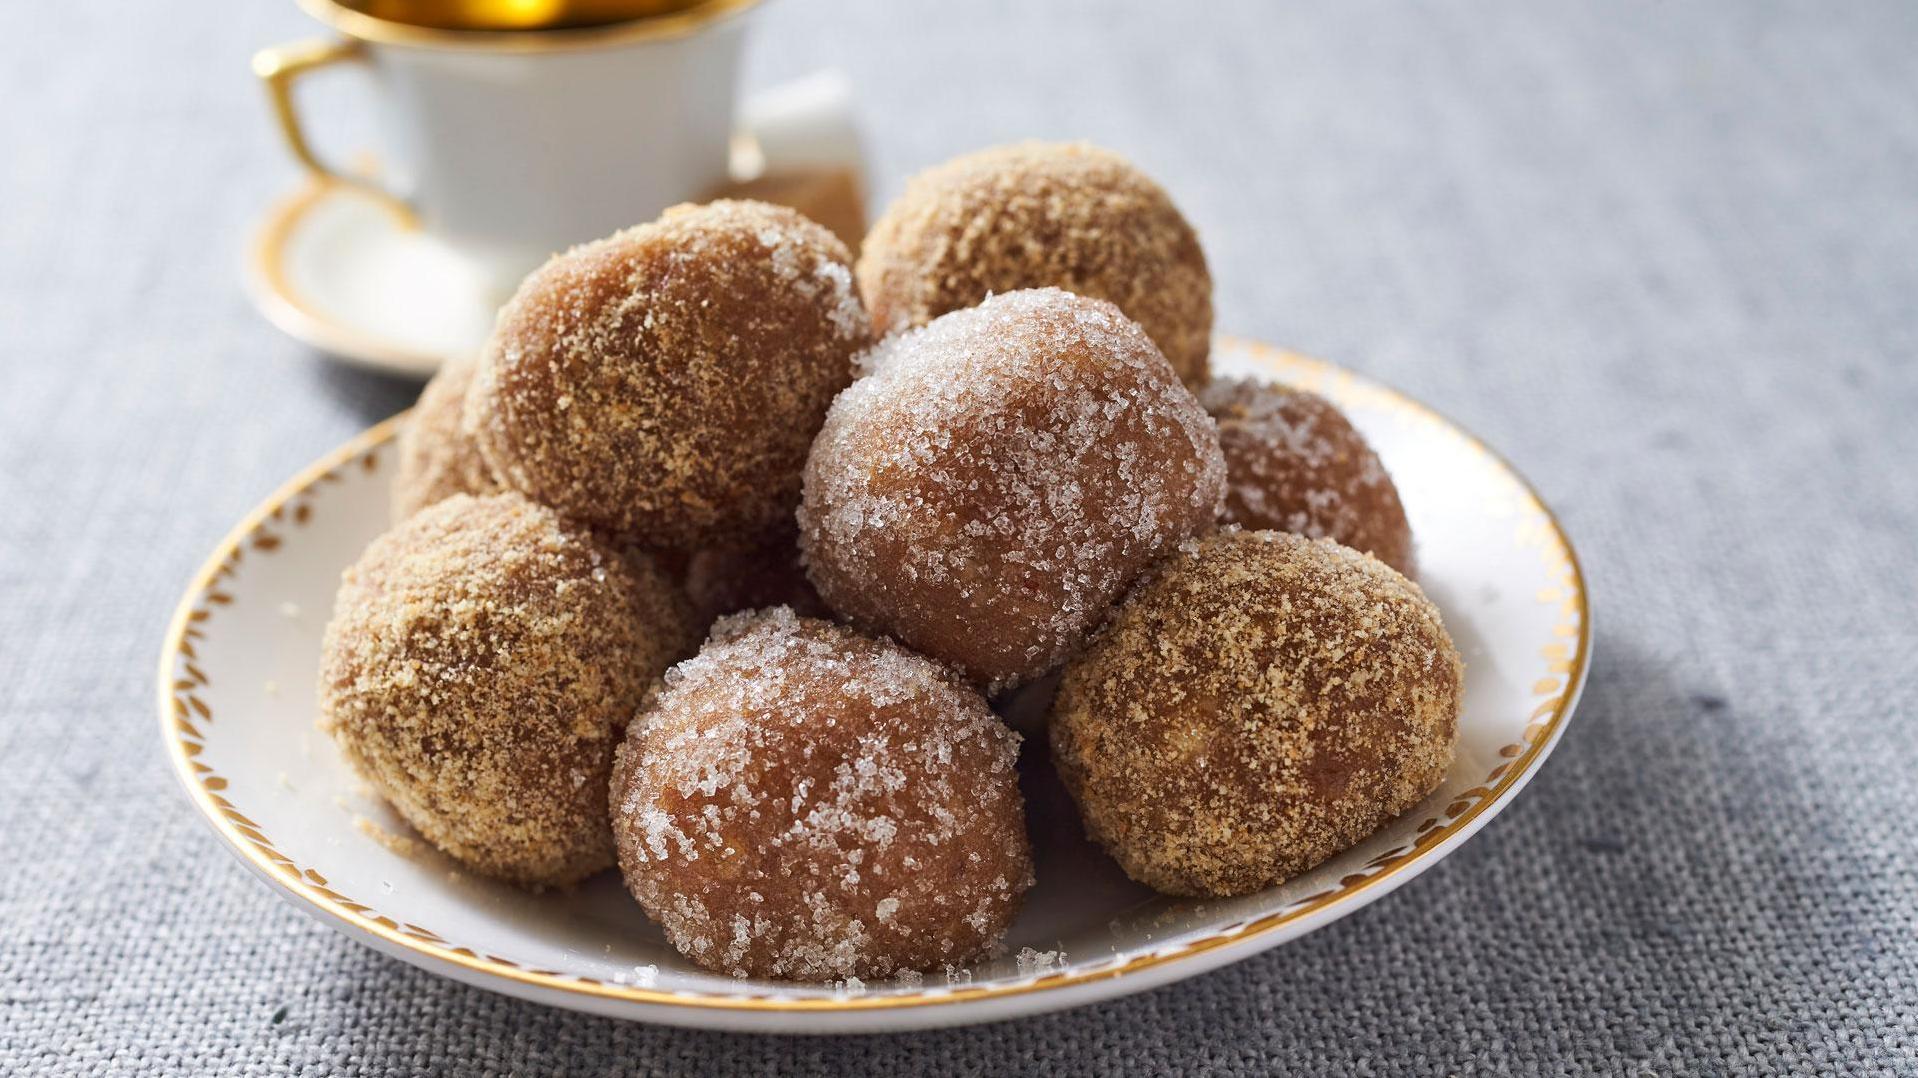  These Southern Rum Balls are sure to be a hit at your next party!